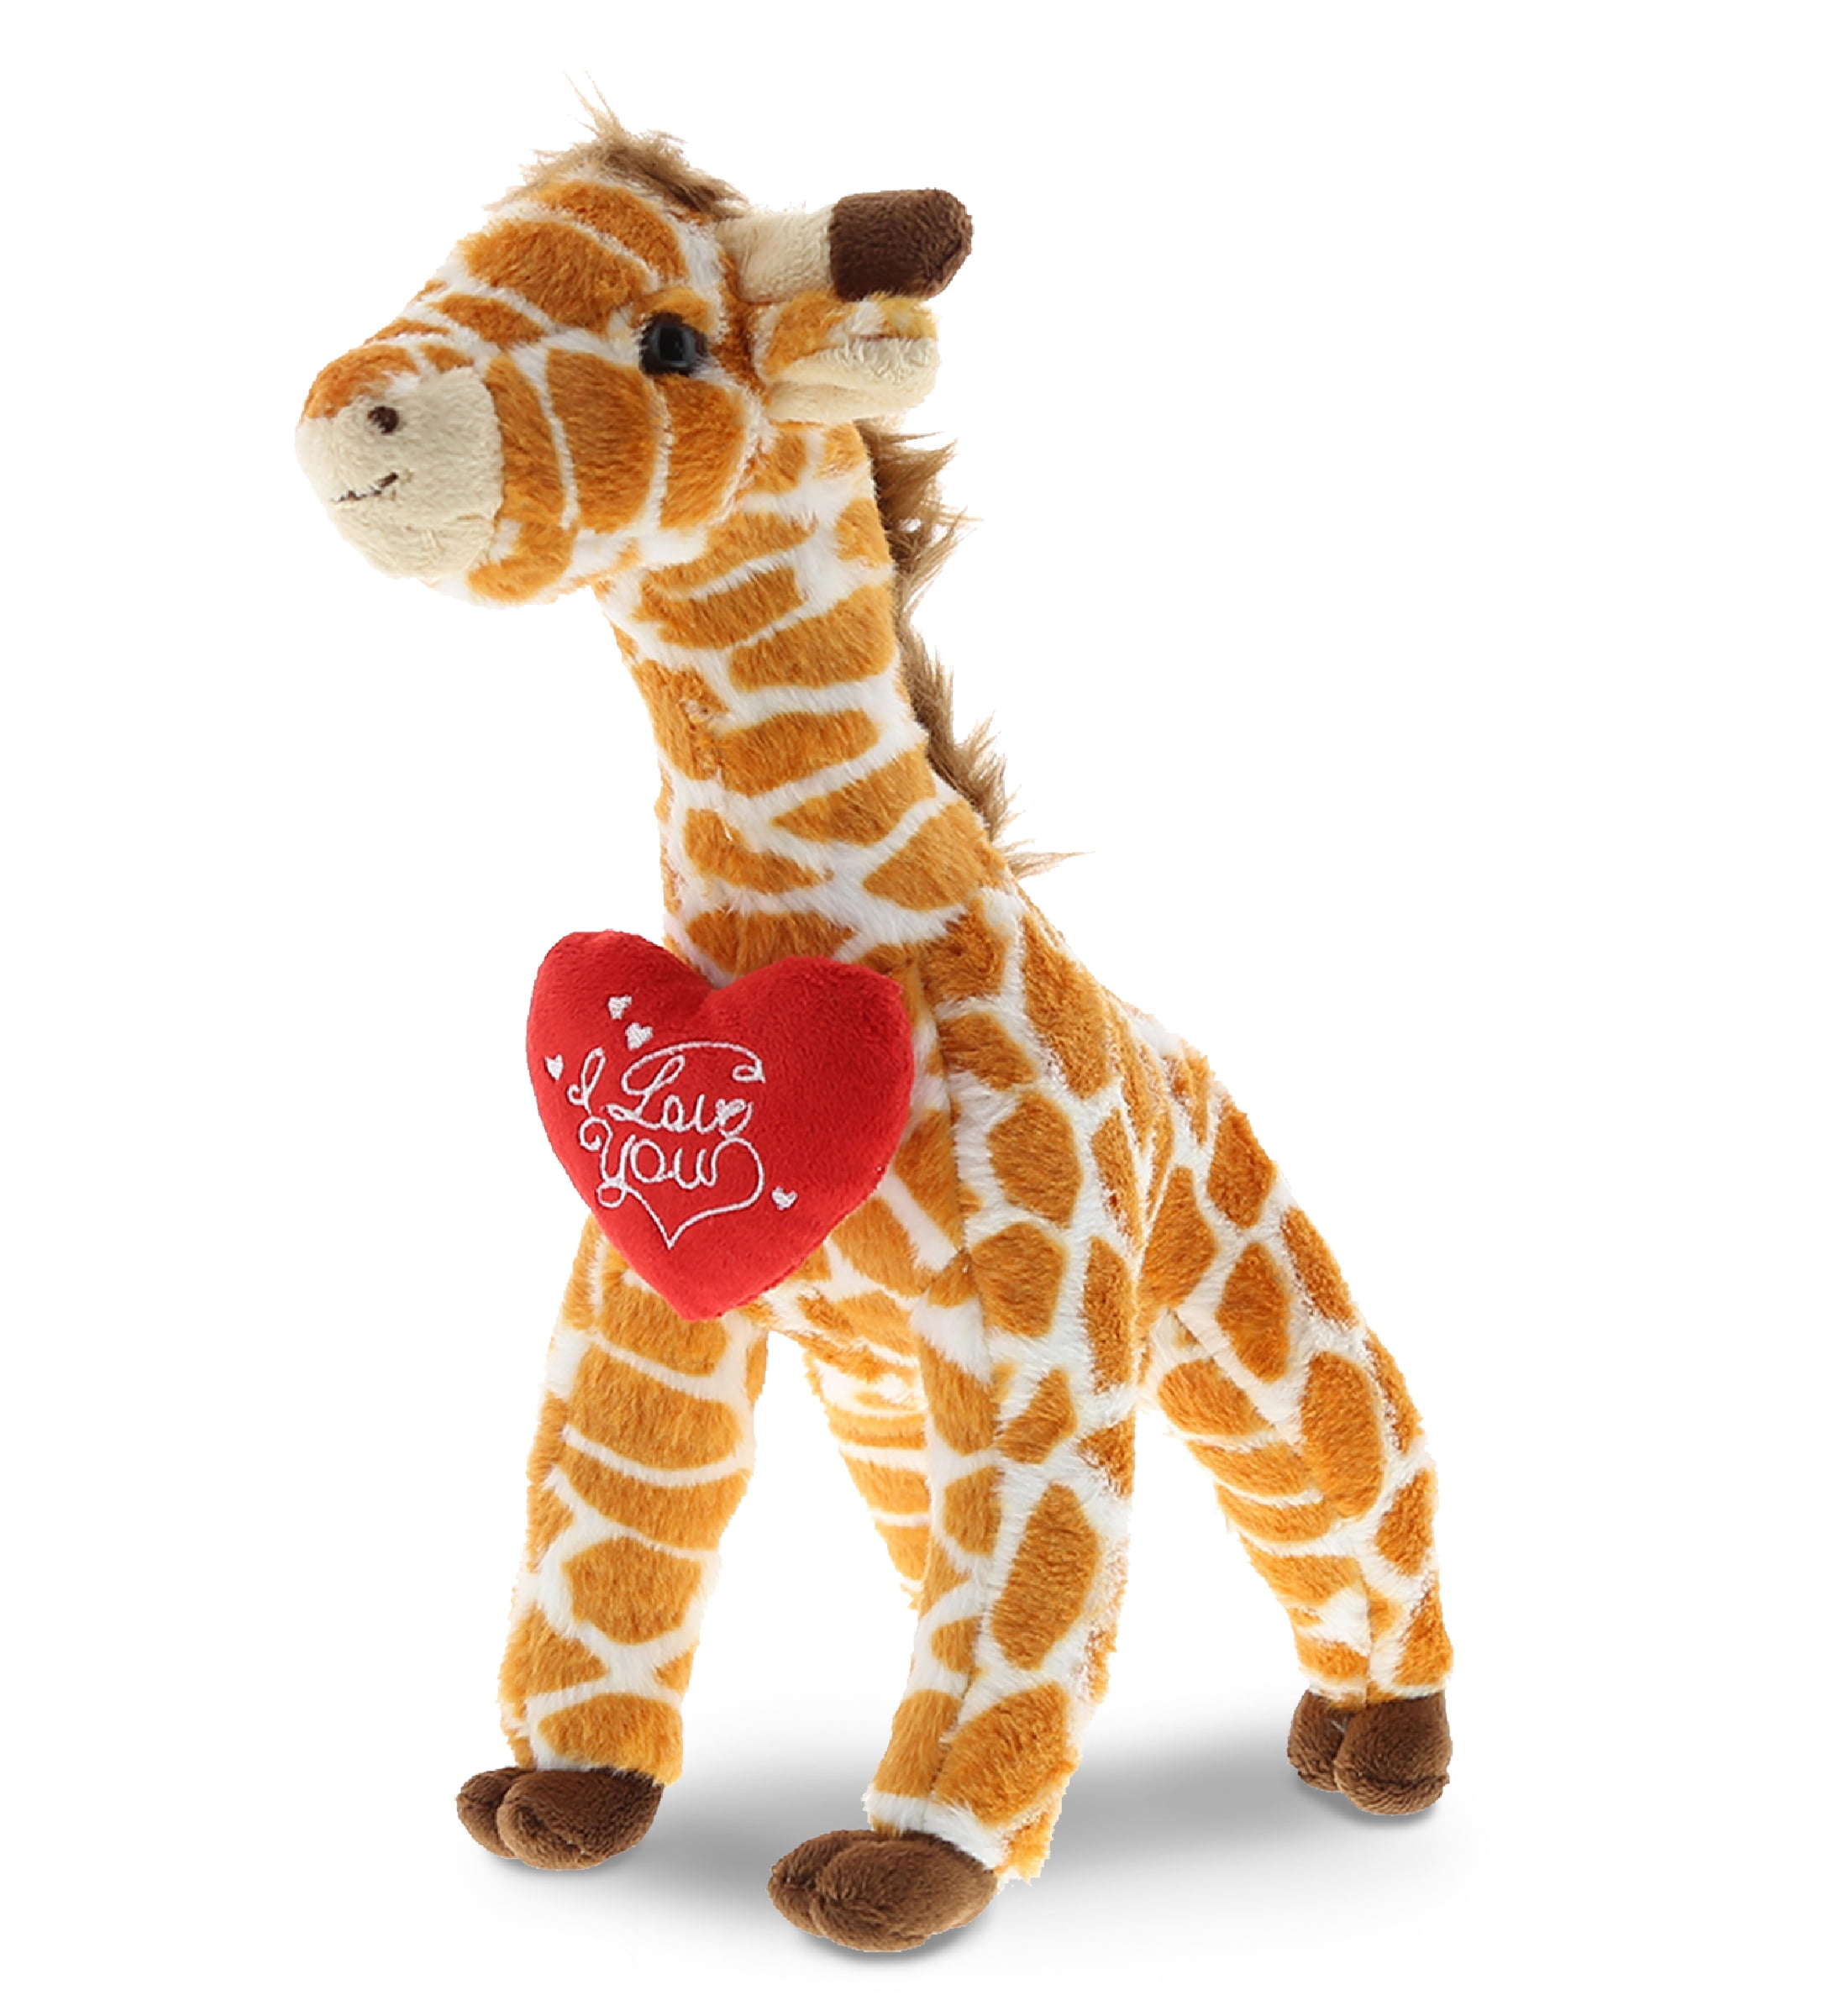 Details about   Soft and cuddly plush toy giraffe